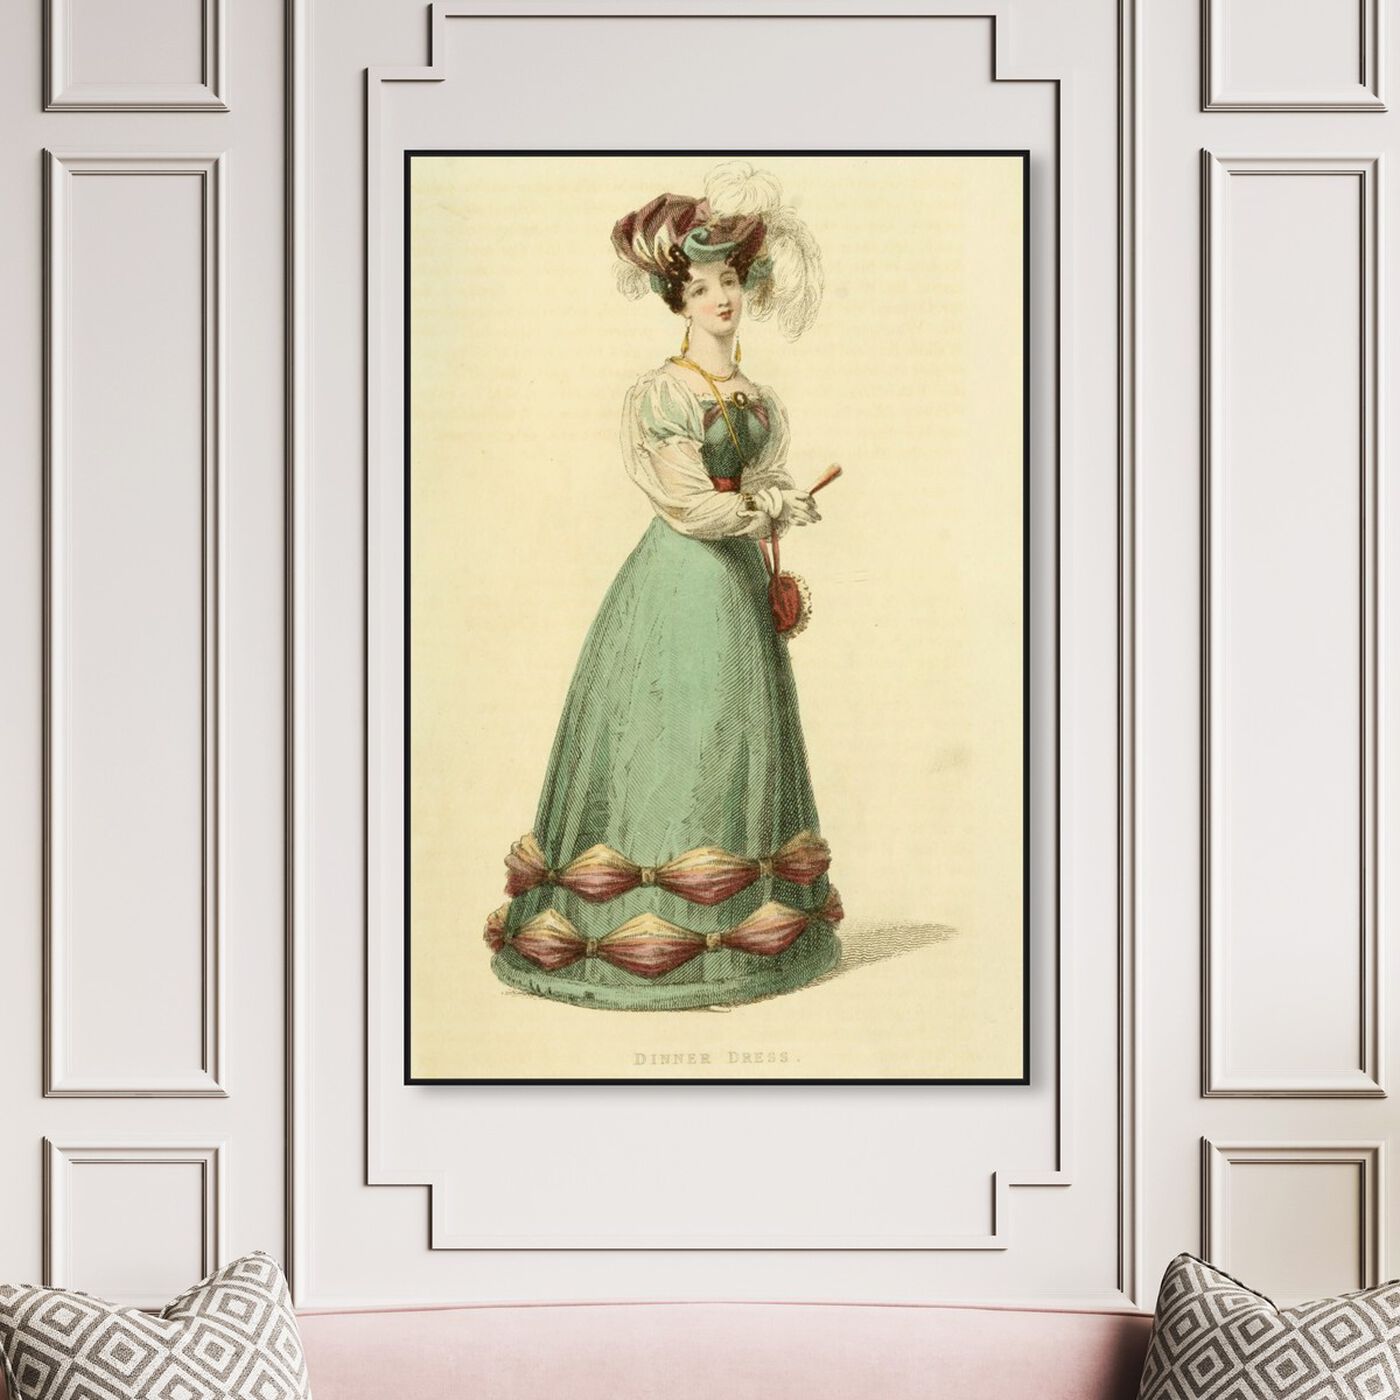 Hanging view of Dinner Dress - The Art Cabinet featuring fashion and glam and dress art.